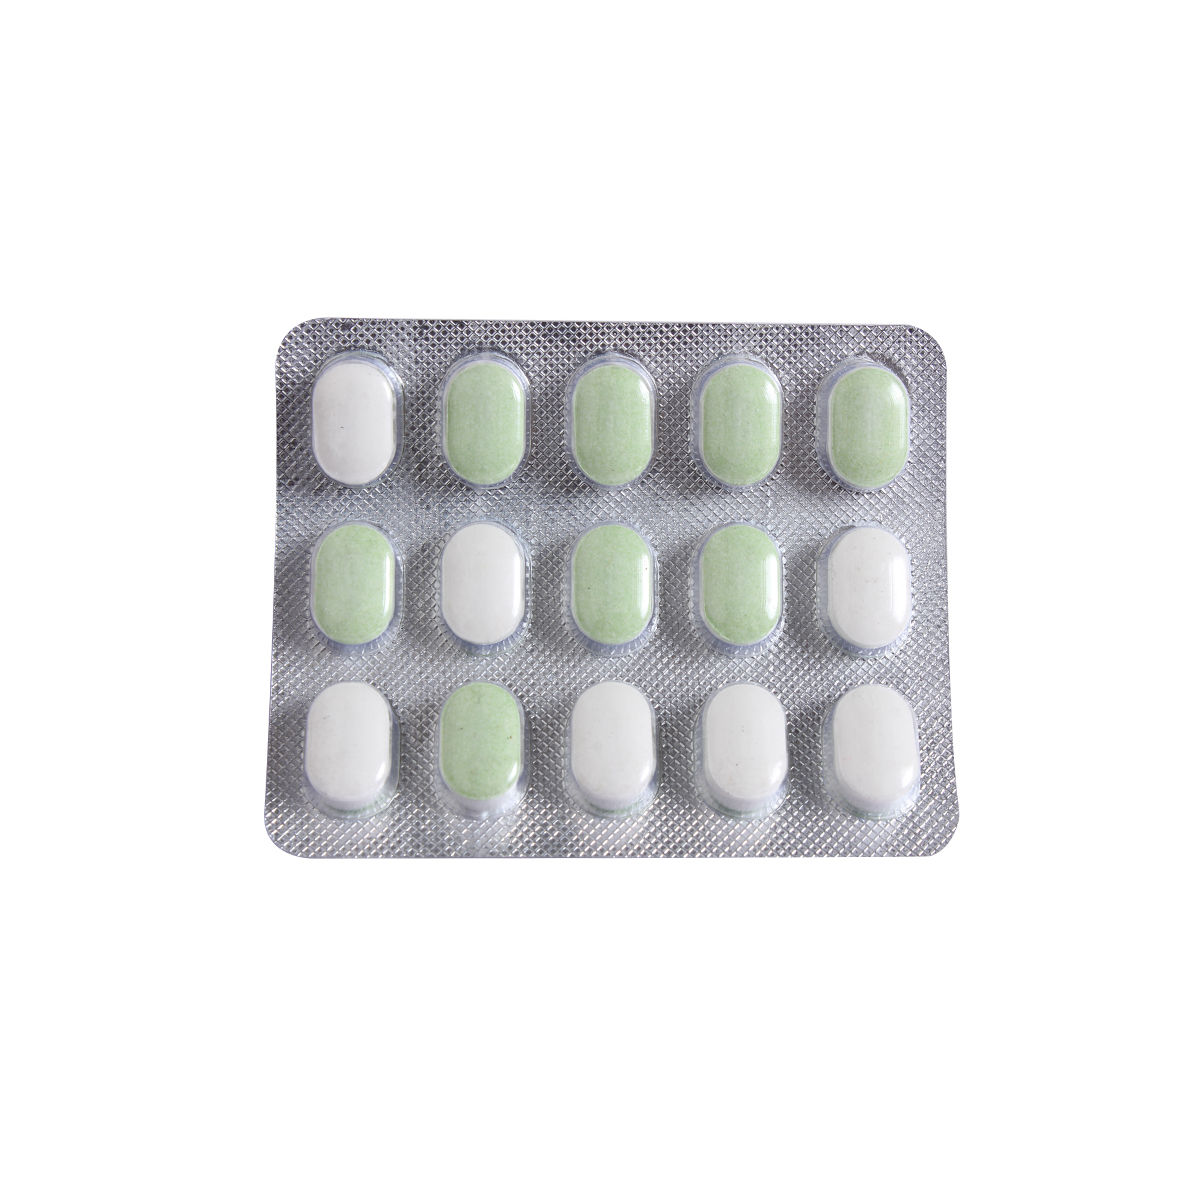 Apriglim-M 0.5 Tablet 15's, Pack of 15 TabletS